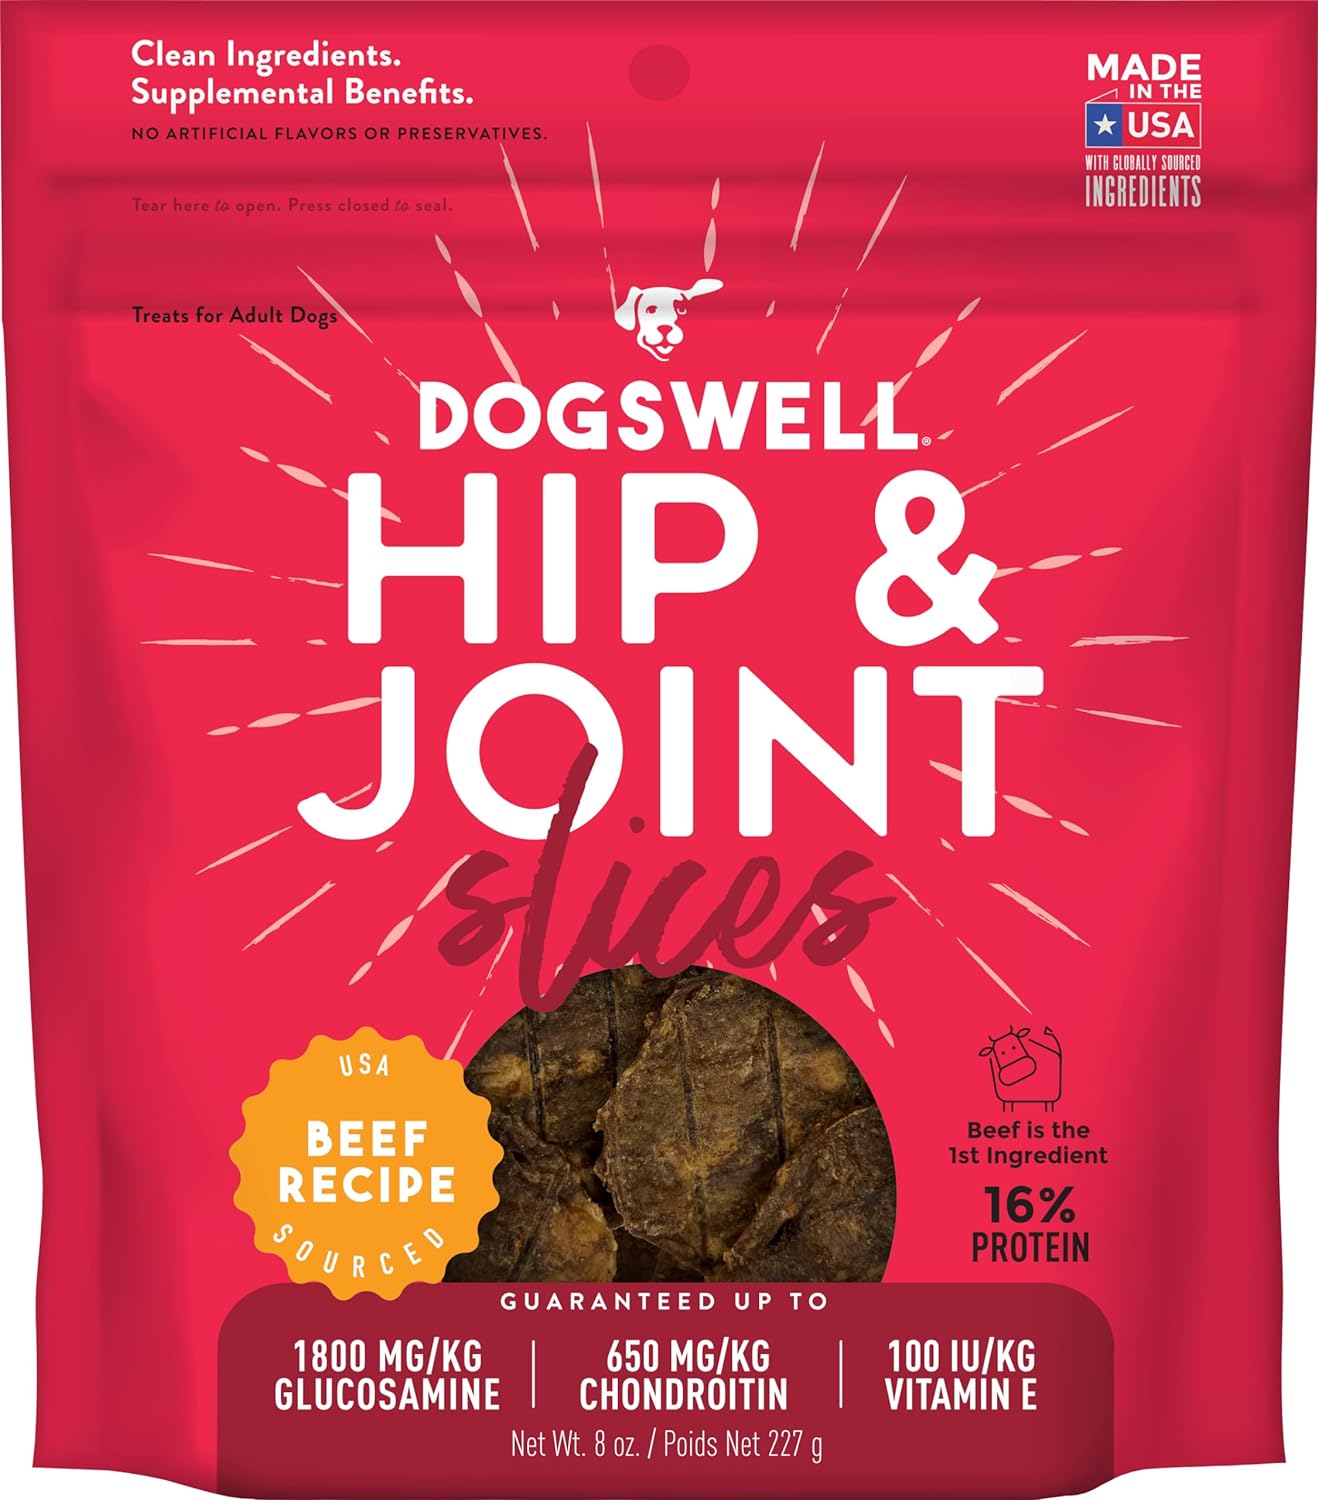 DOGSWELL Hip & Joint Slices Functional Dog Treats, Beef 8 oz. Bag